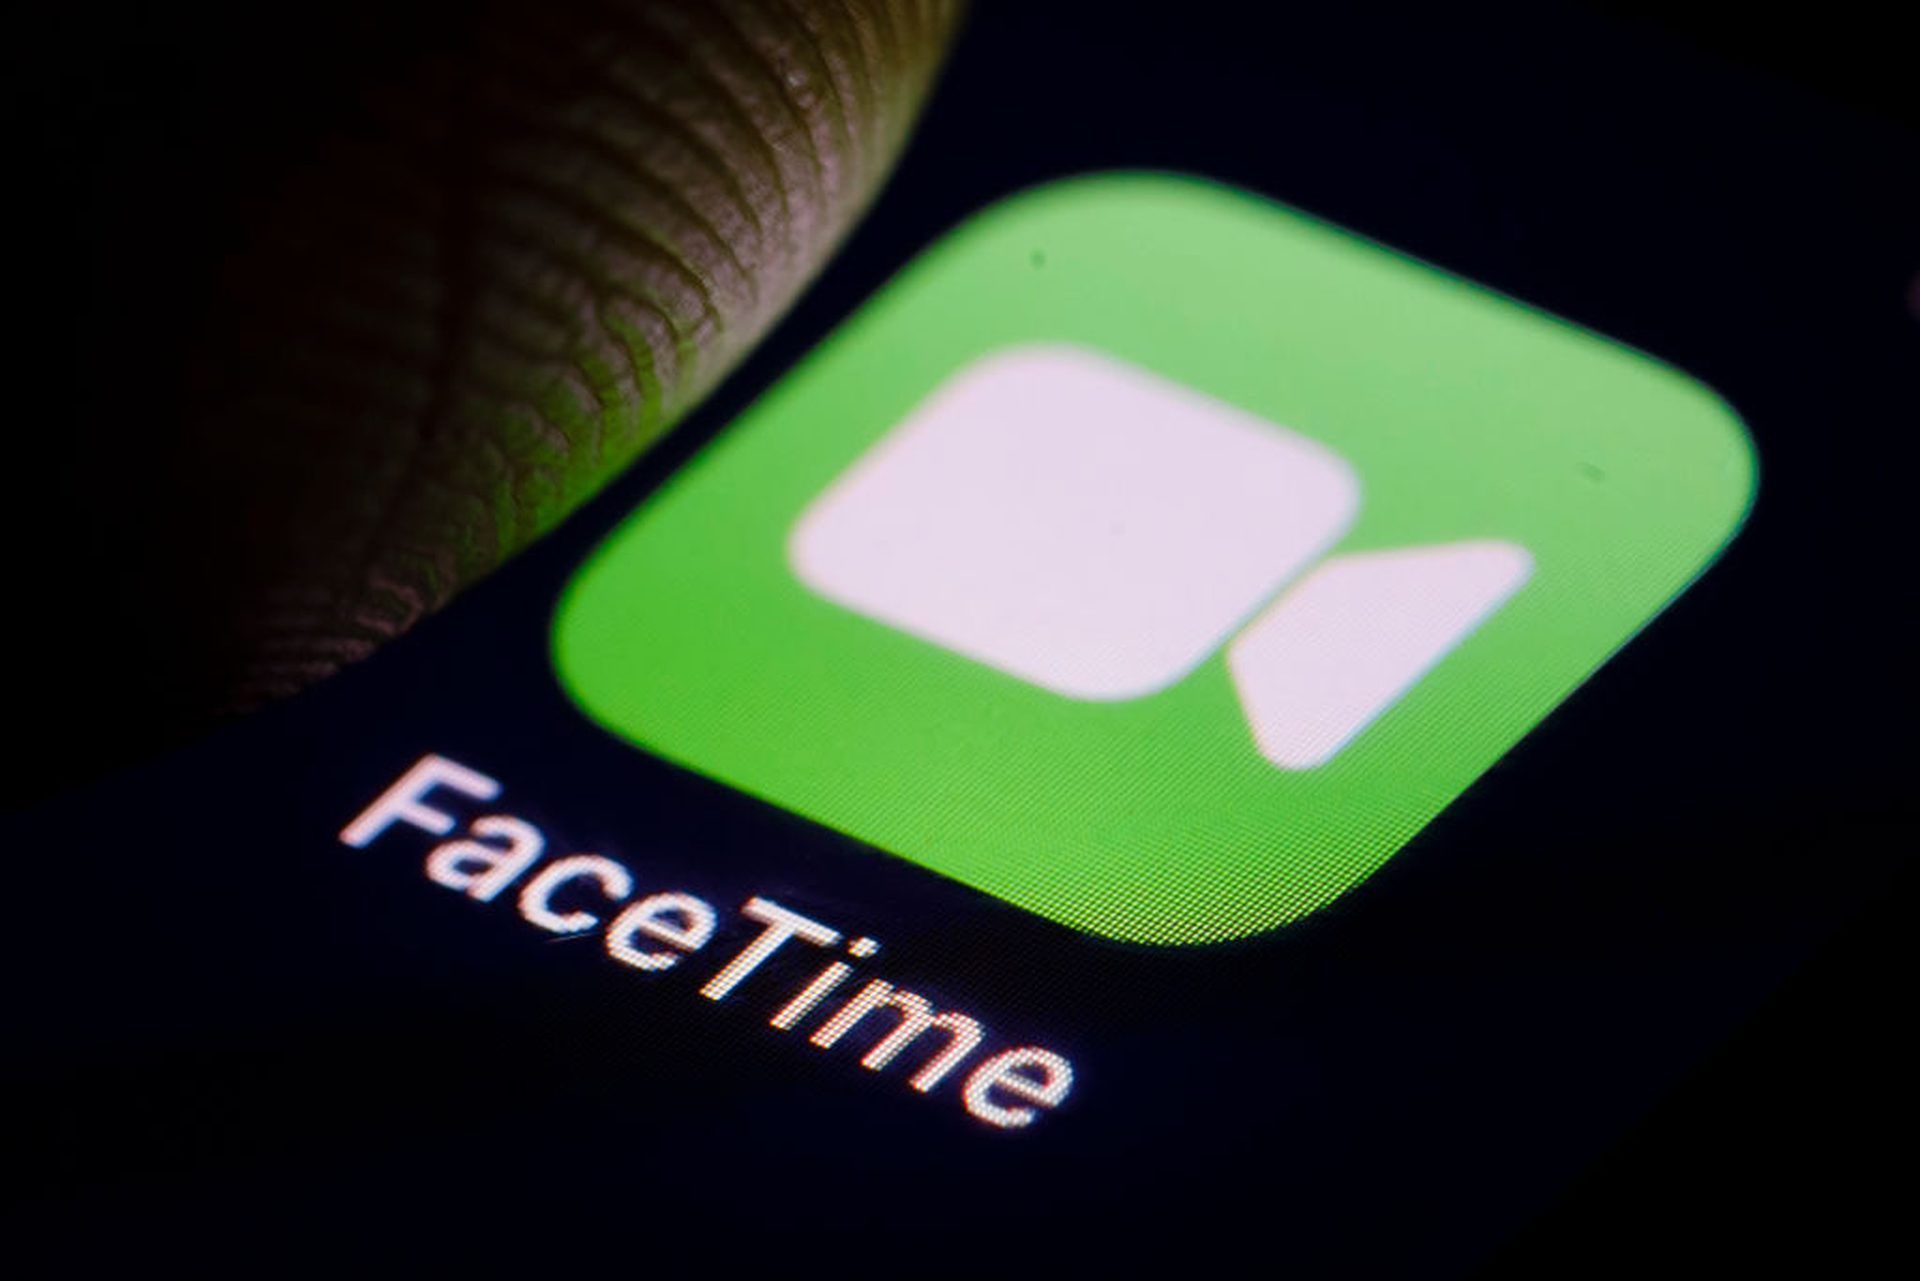 How to use FaceTime eye contact?